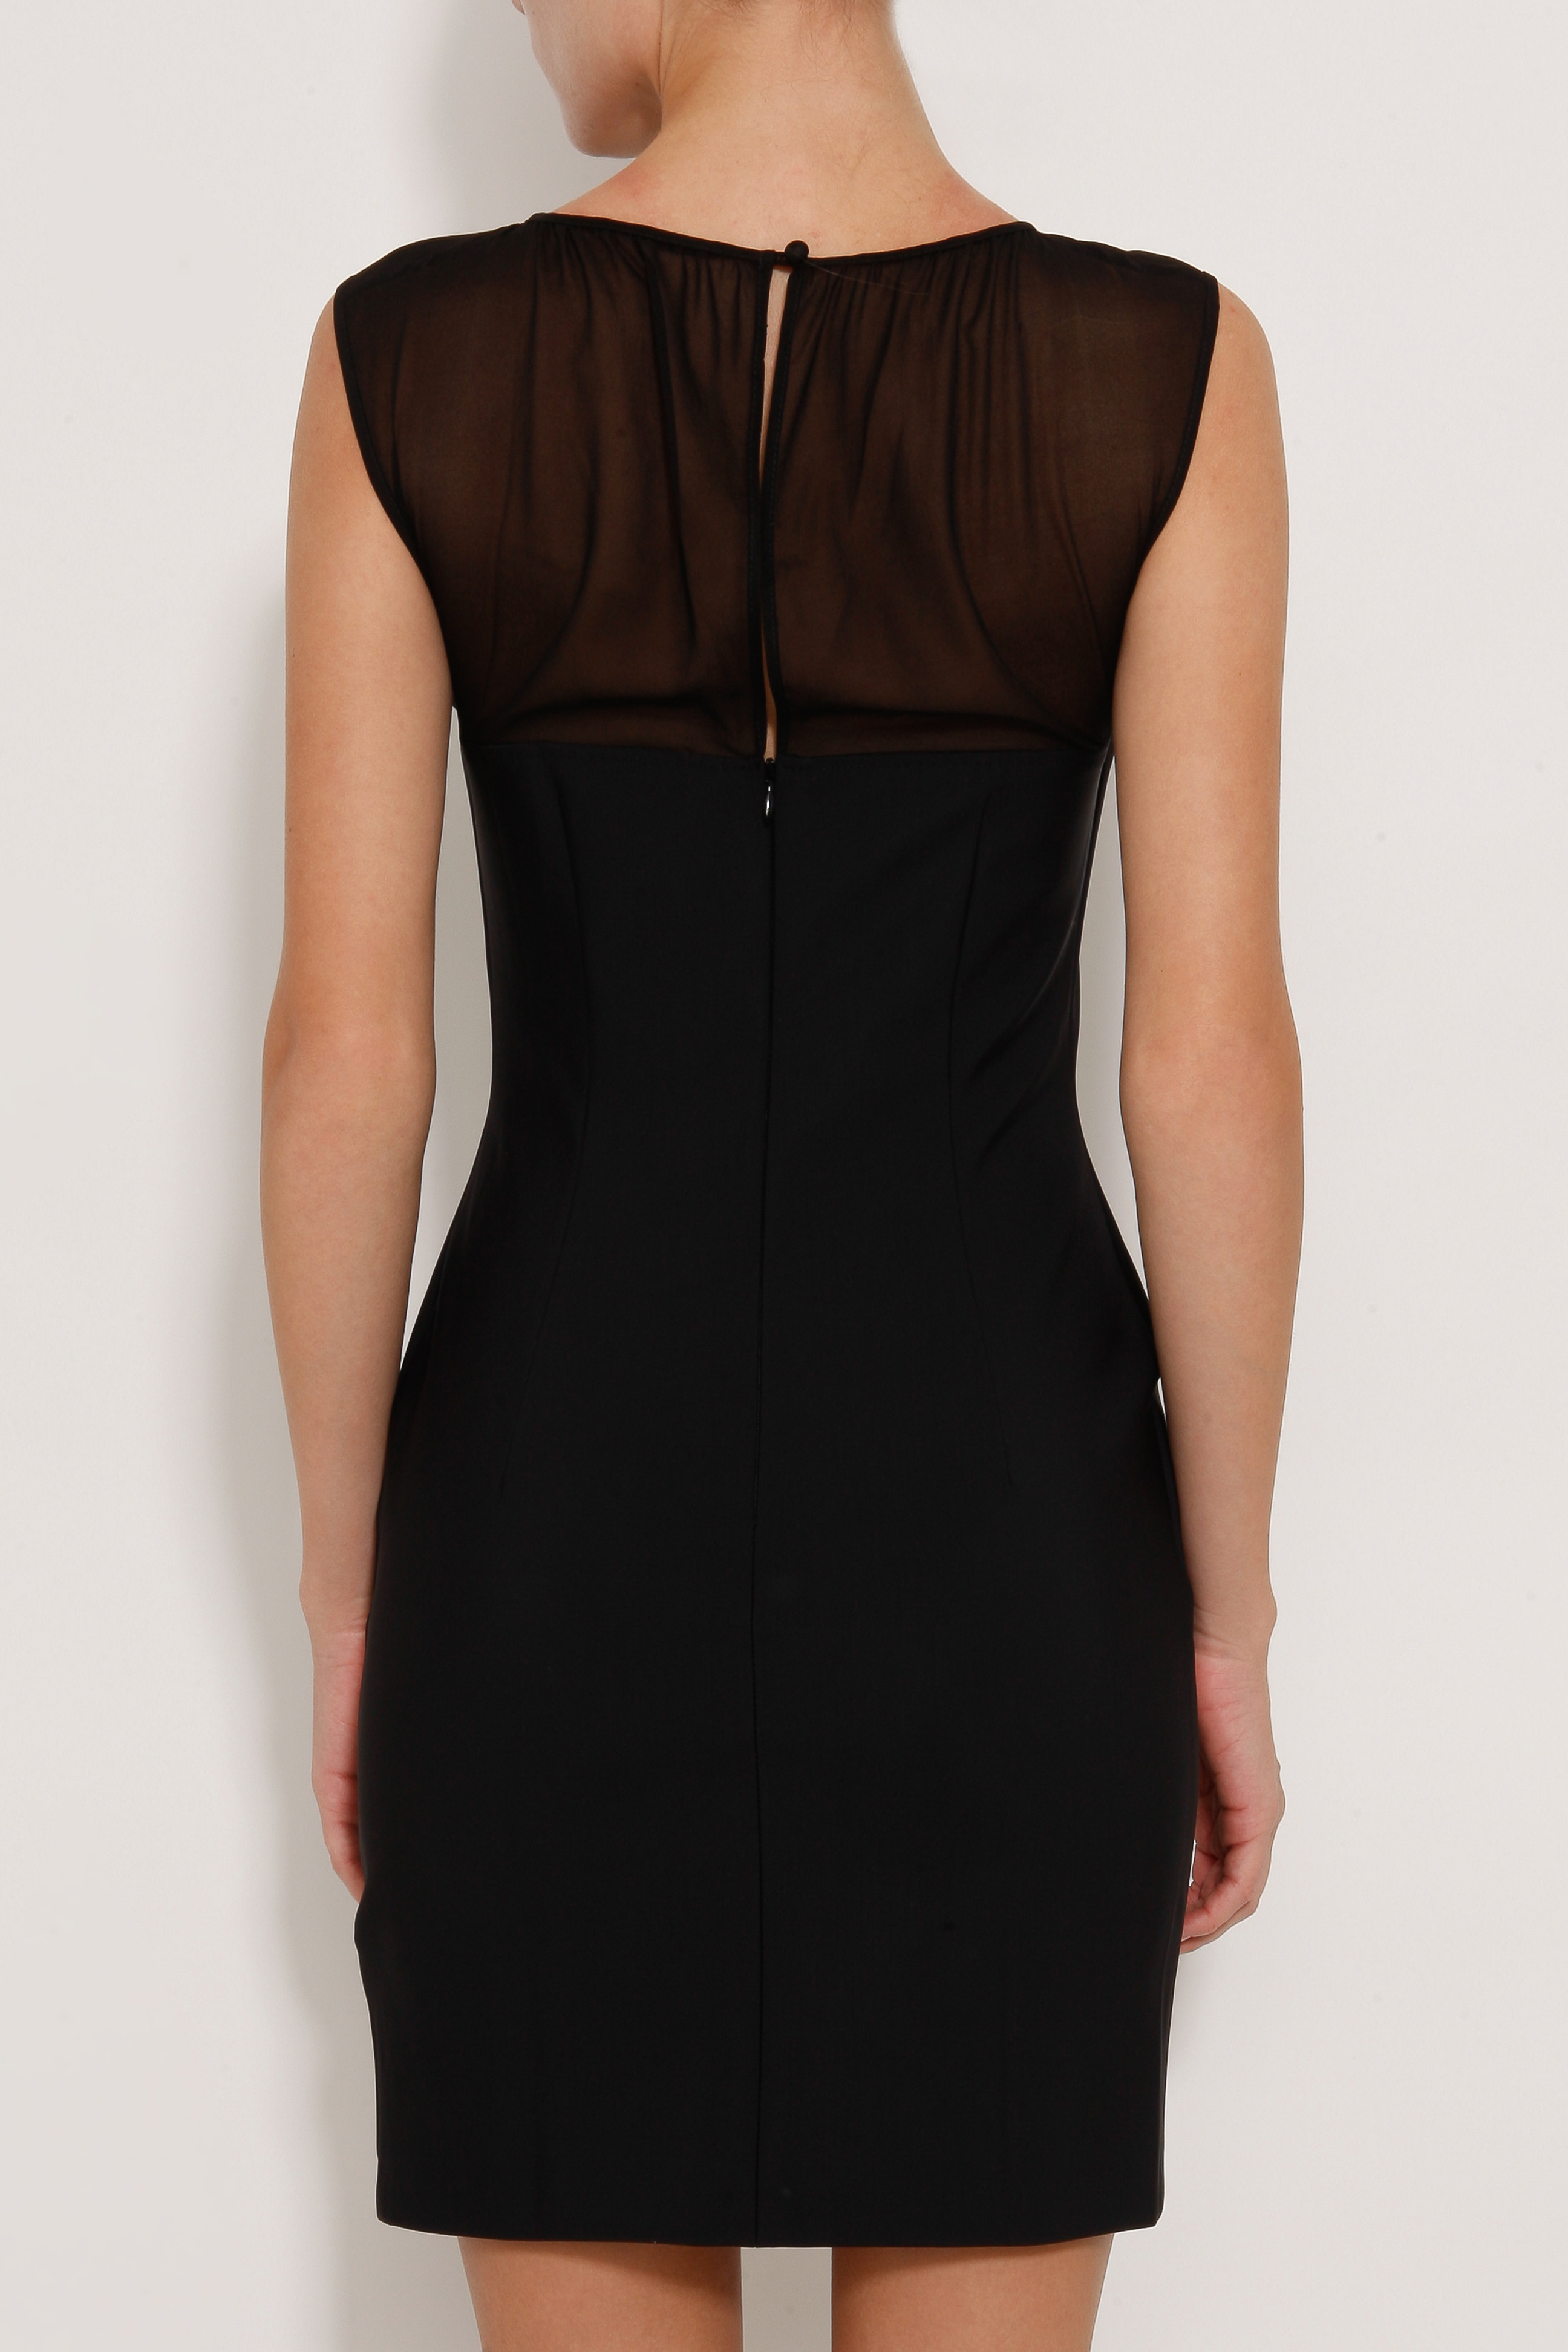 Popular Bodycon Dresses And Perfect Choices